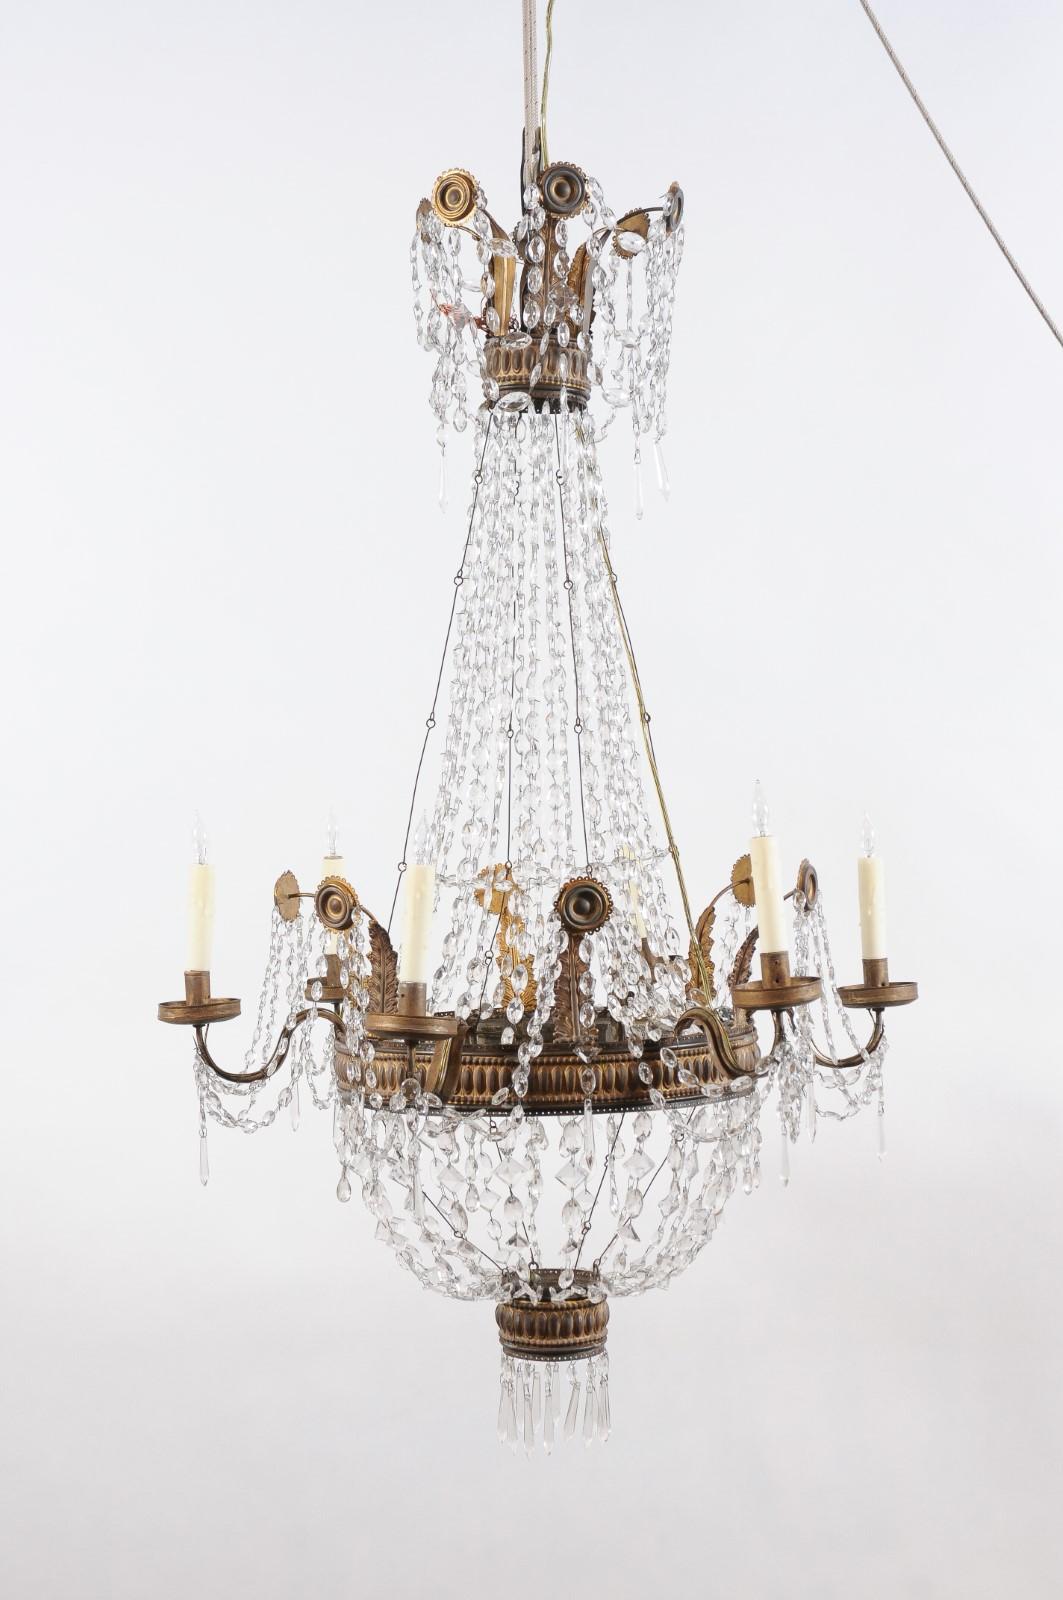 Neoclassical Gilt Metal Chandelier featuring Greek Key Design with Crystal In Fair Condition For Sale In Atlanta, GA